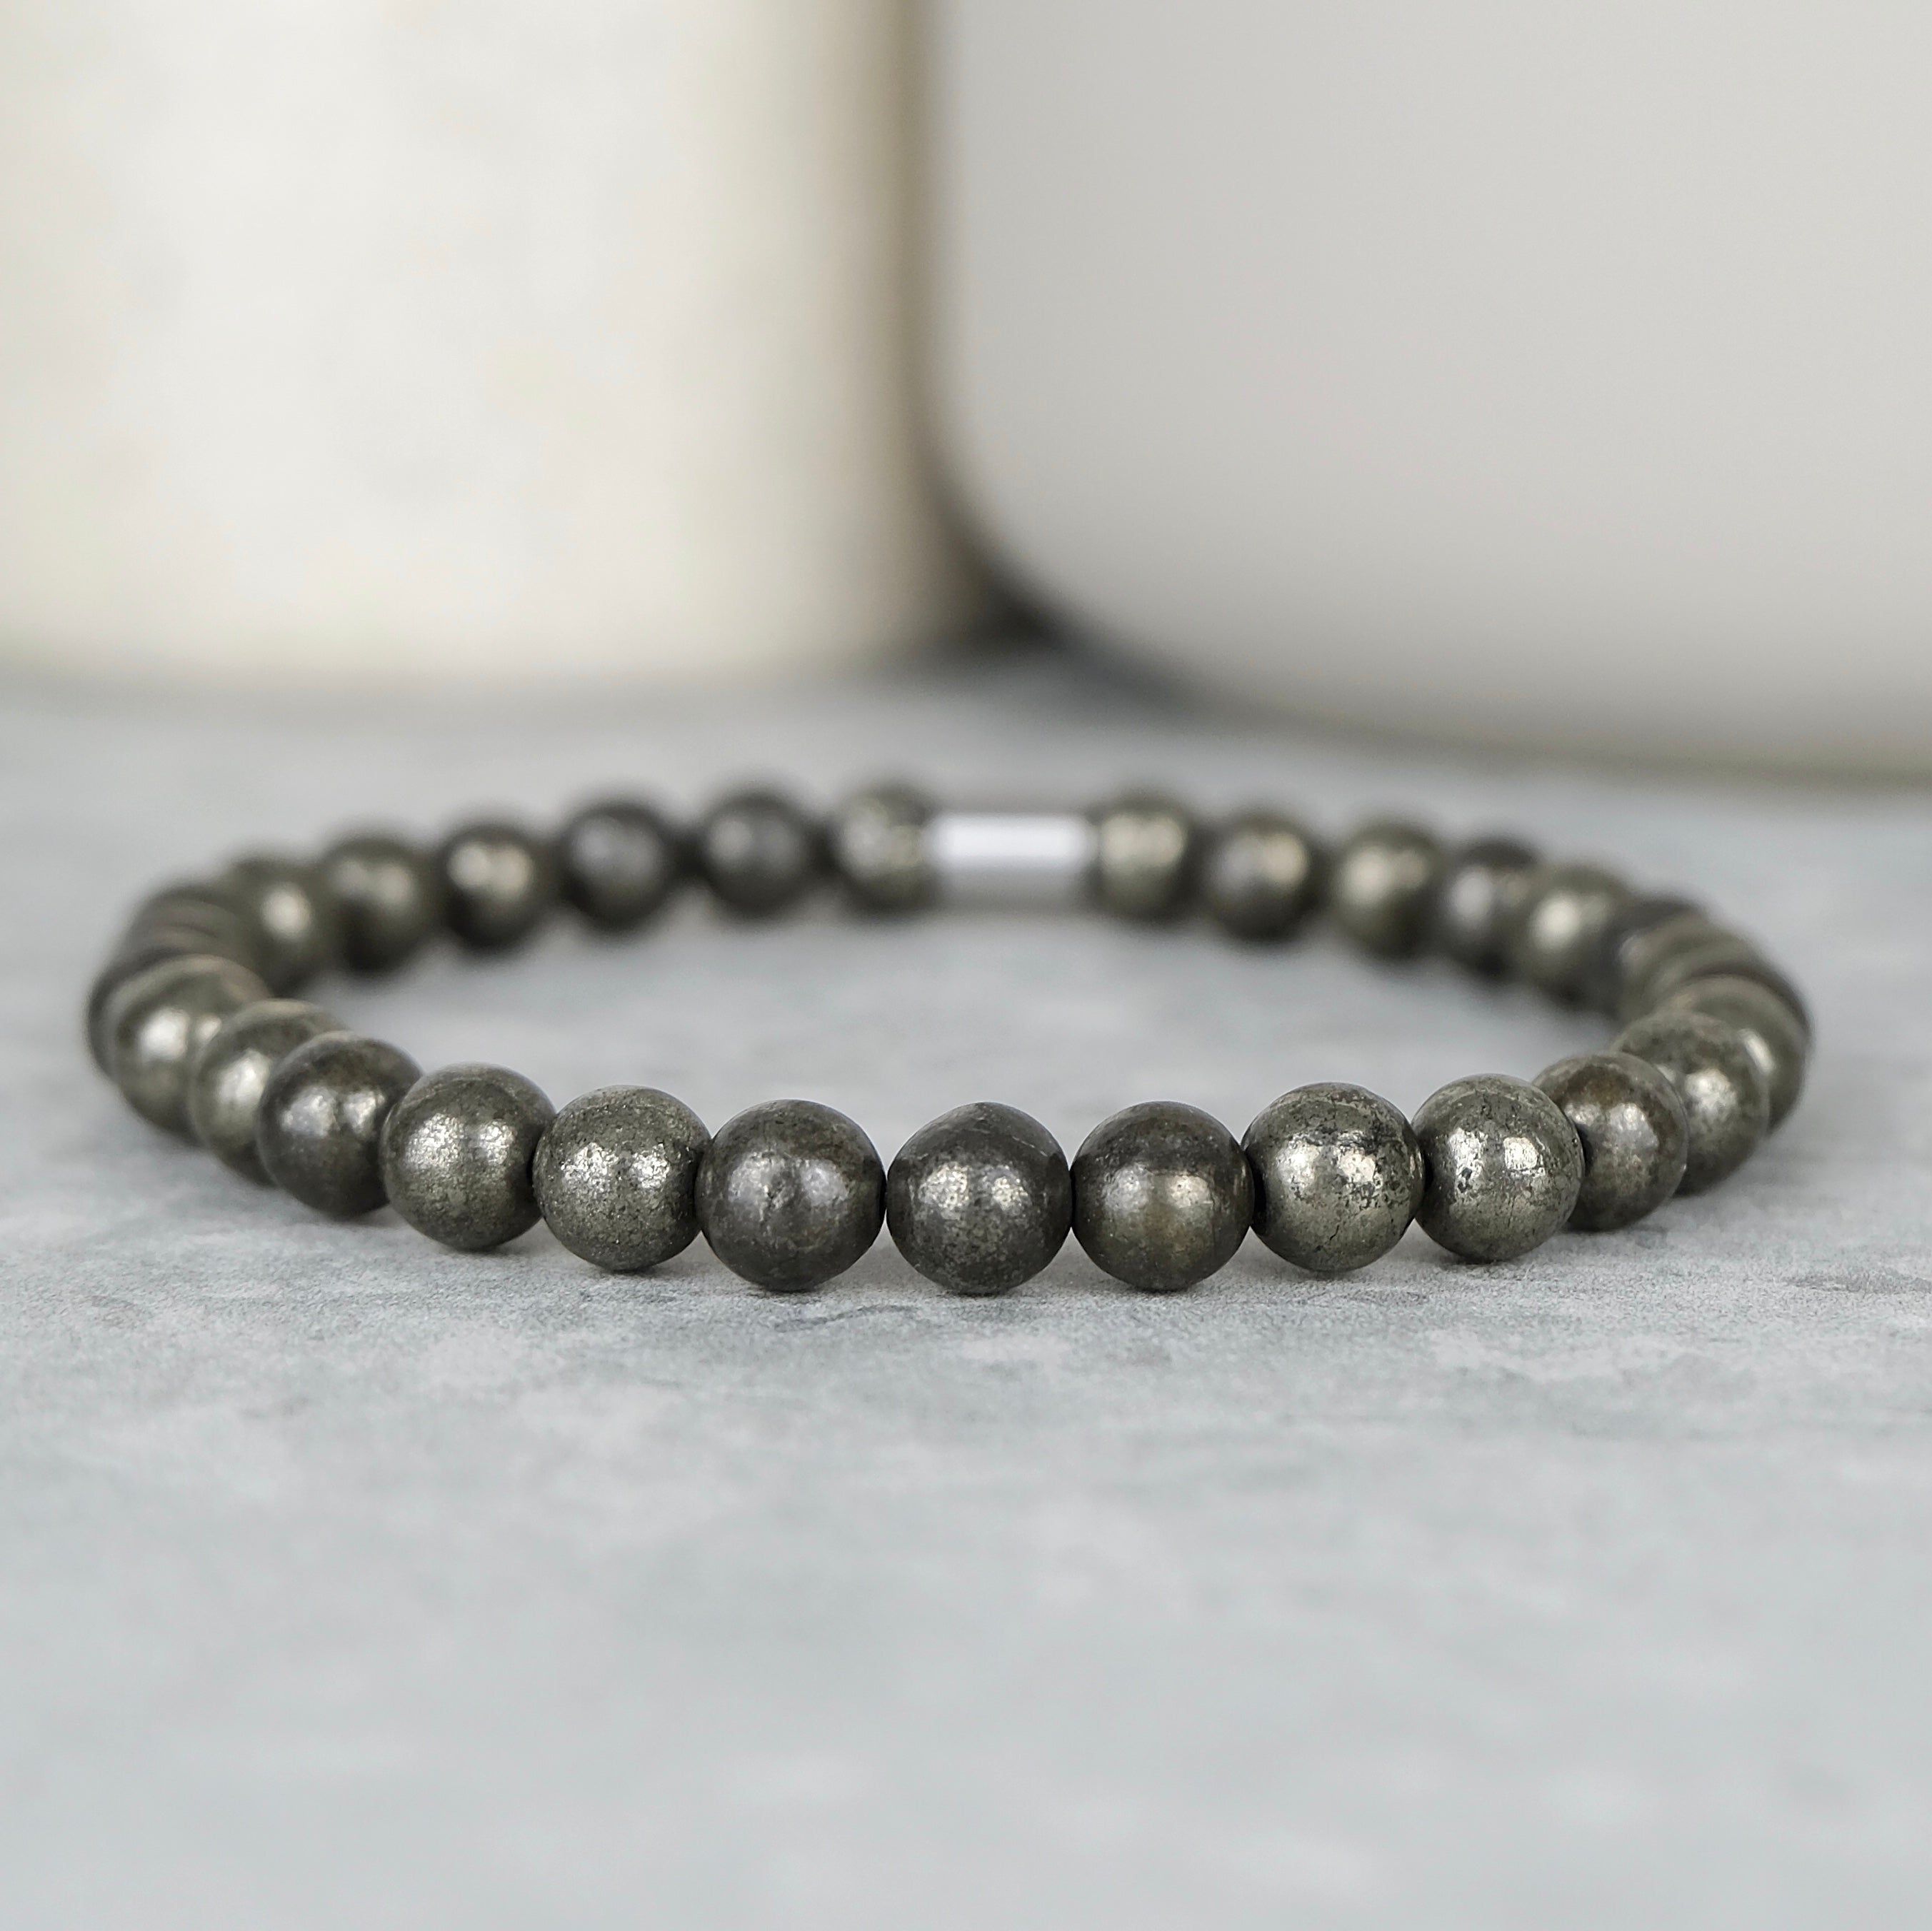 A pyrite gemstone bracelet in 6mm beads with steel accessory